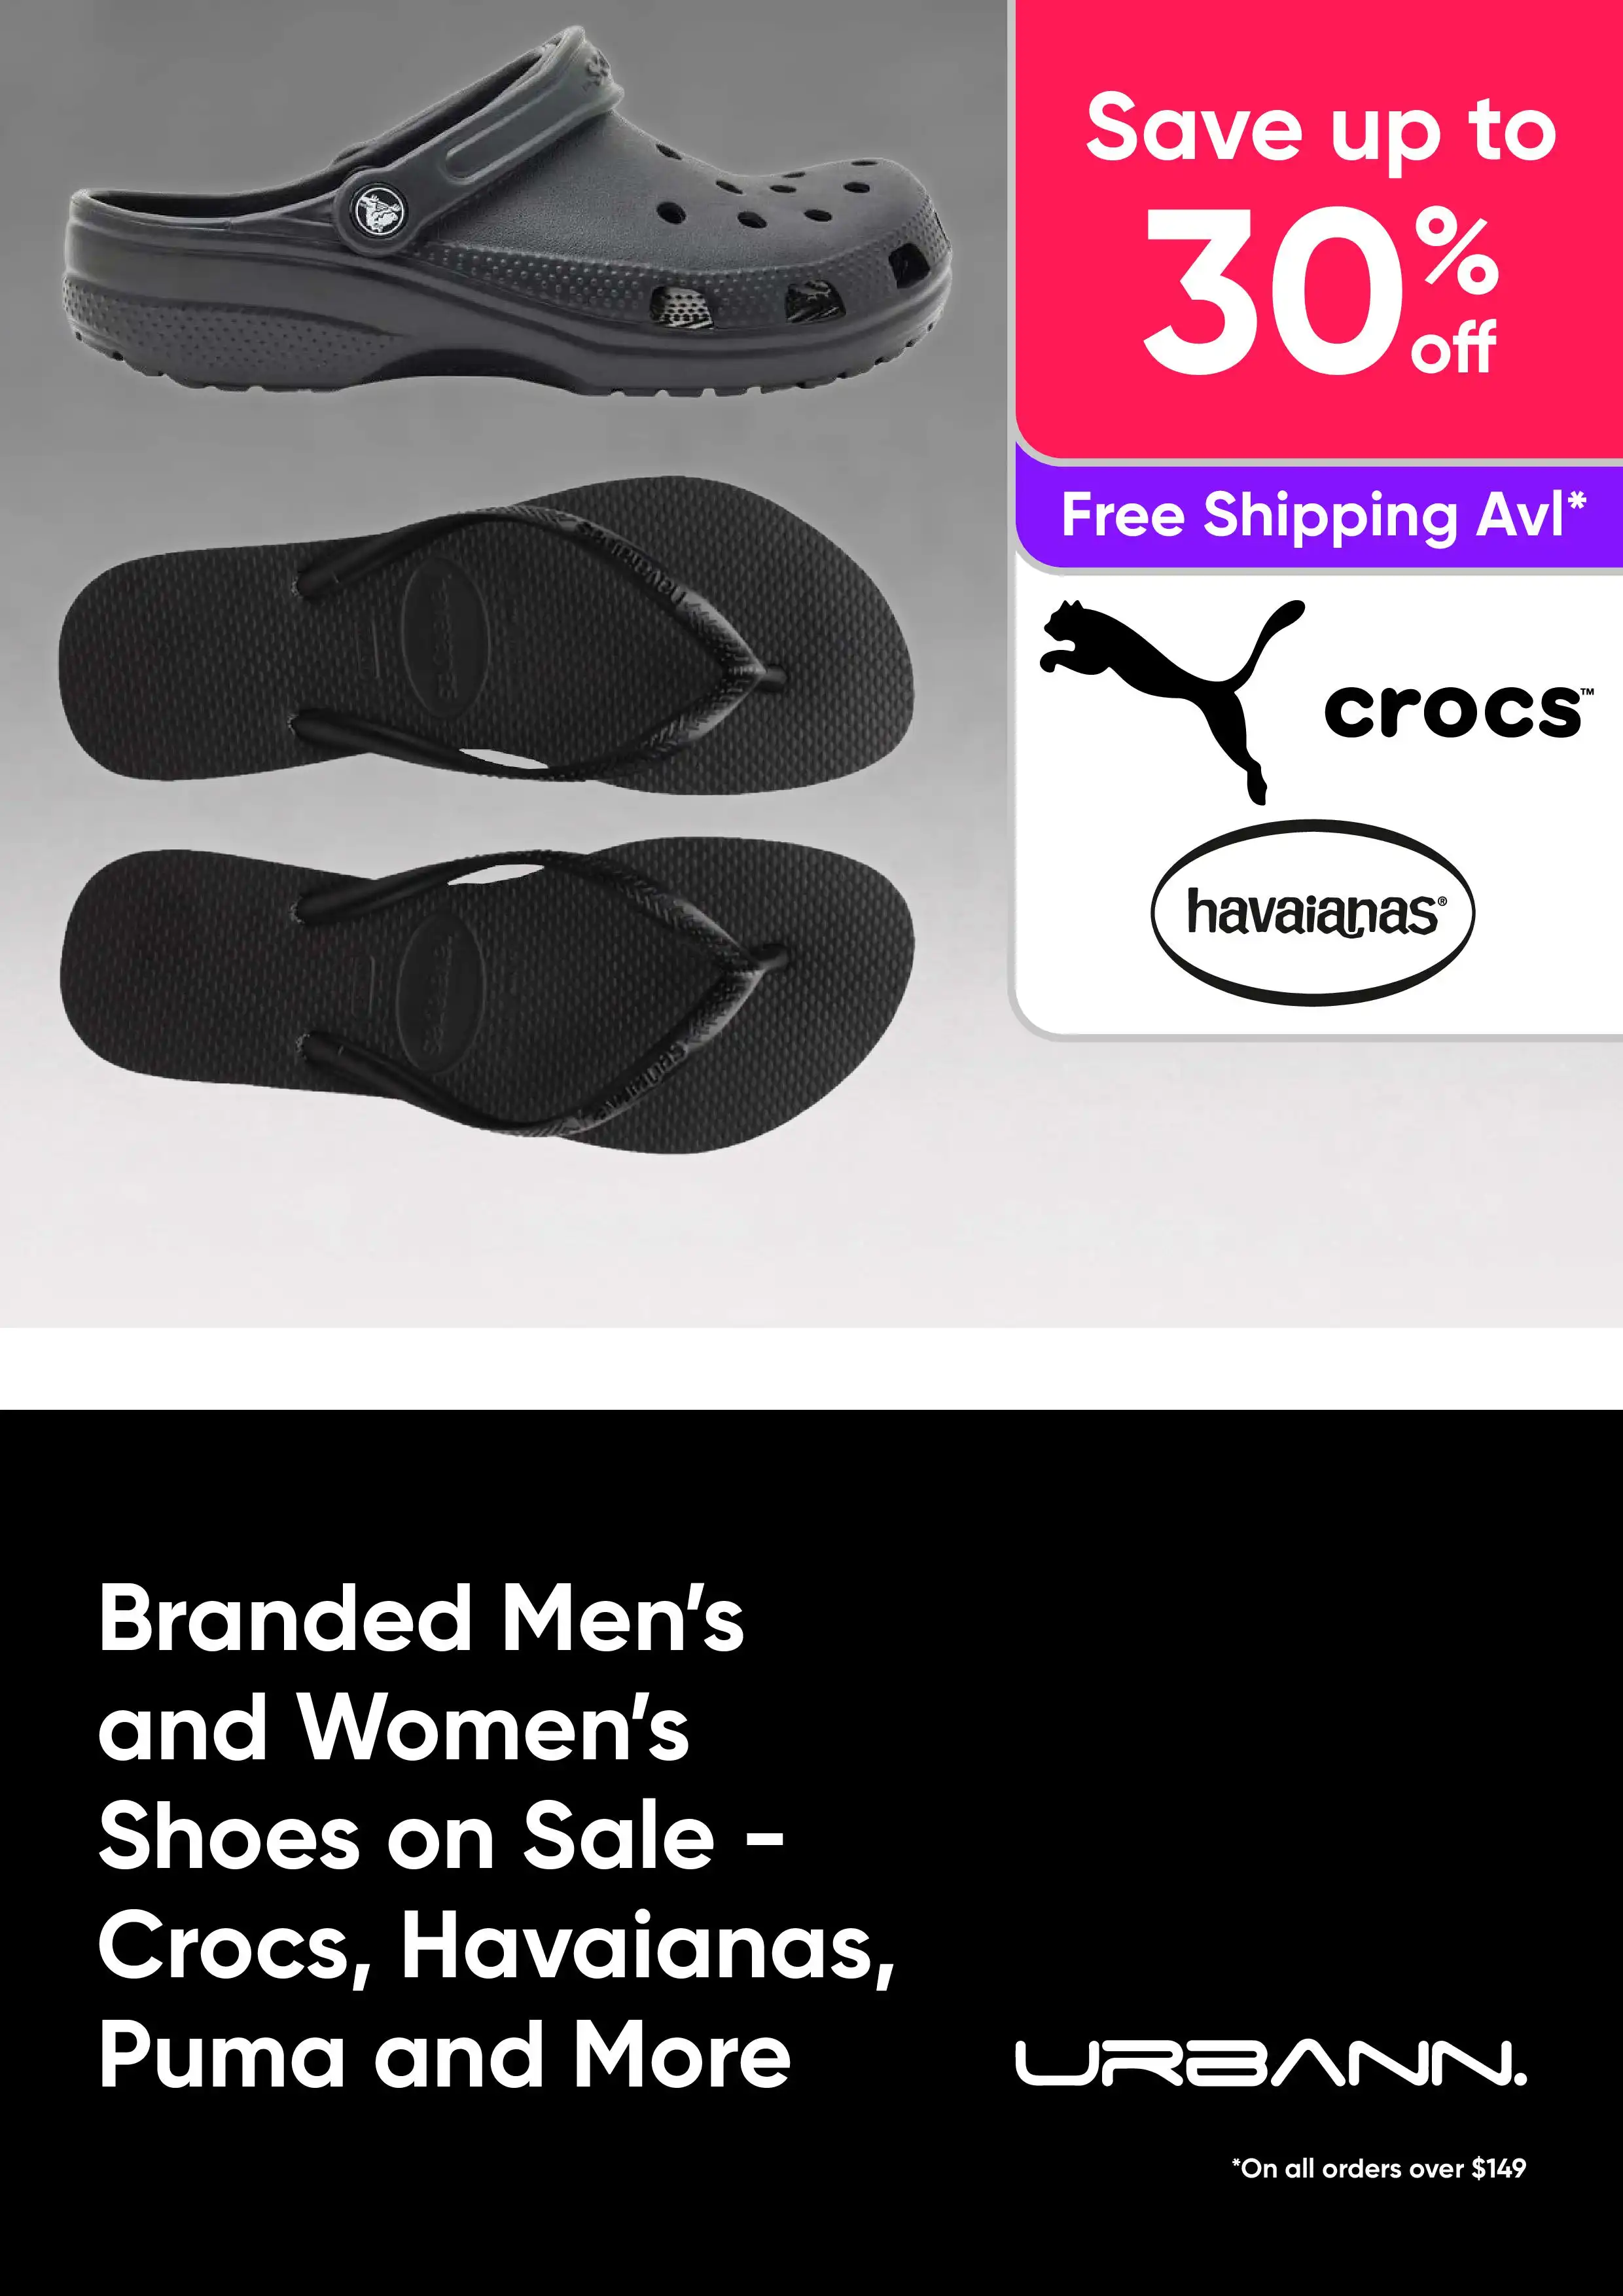 Branded Mens and Womens Shoes on Sale - Save Up to 30% on Crocs, Havianas, Puma and More